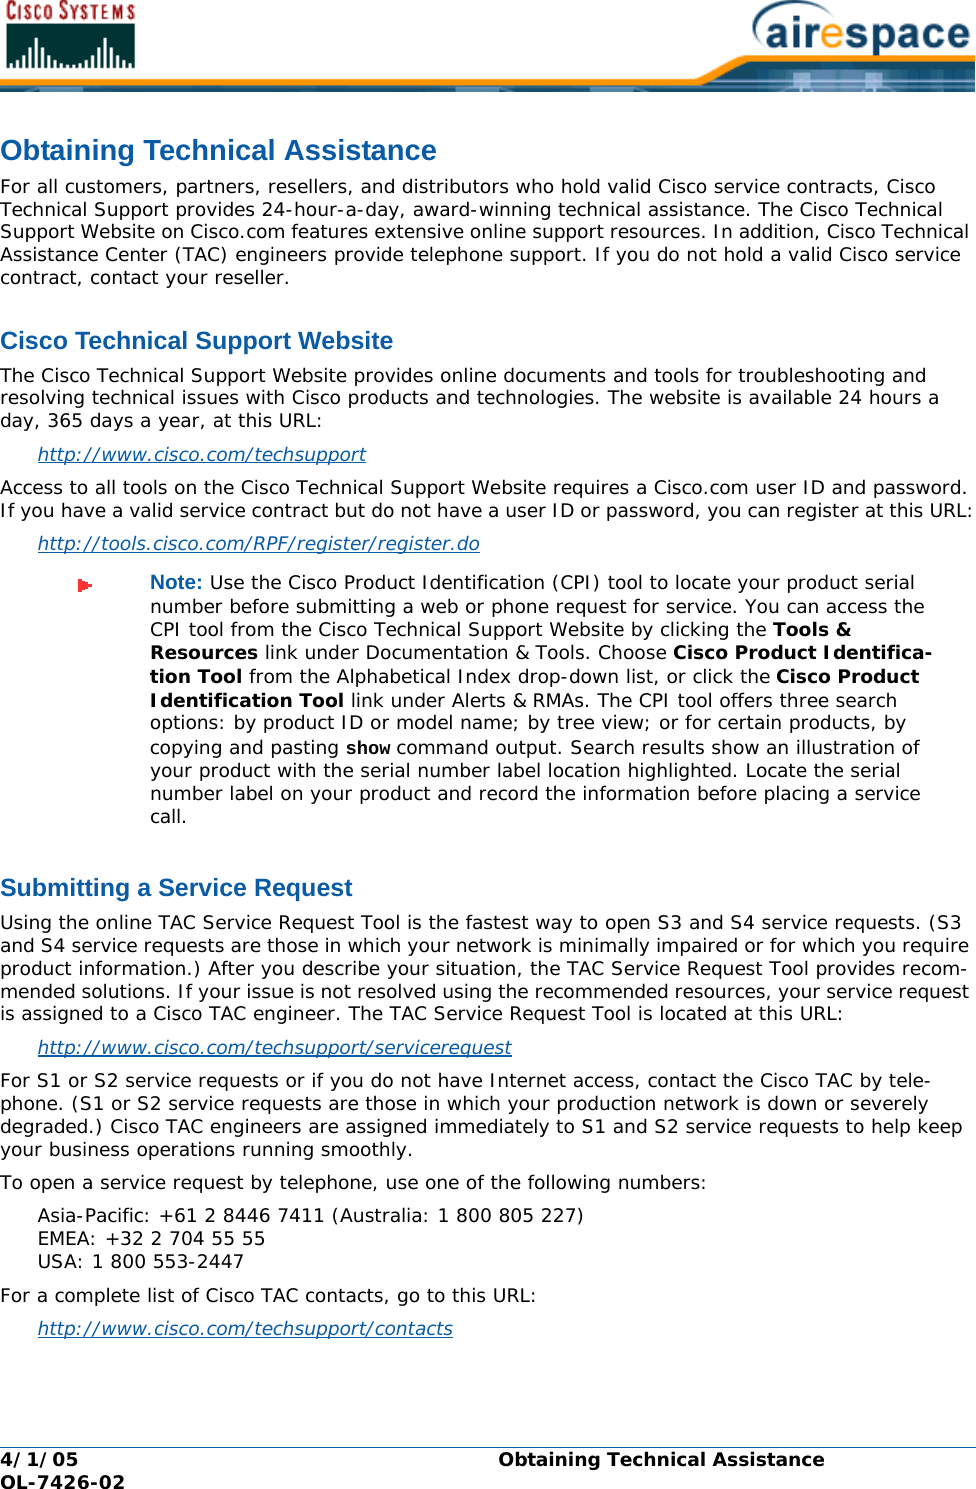 4/1/05 Obtaining Technical Assistance  OL-7426-02Obtaining Technical AssistanceObtaining Technical AssistanceFor all customers, partners, resellers, and distributors who hold valid Cisco service contracts, Cisco Technical Support provides 24-hour-a-day, award-winning technical assistance. The Cisco Technical Support Website on Cisco.com features extensive online support resources. In addition, Cisco Technical Assistance Center (TAC) engineers provide telephone support. If you do not hold a valid Cisco service contract, contact your reseller.Cisco Technical Support WebsiteCisco Technical Support WebsiteThe Cisco Technical Support Website provides online documents and tools for troubleshooting and resolving technical issues with Cisco products and technologies. The website is available 24 hours a day, 365 days a year, at this URL:http://www.cisco.com/techsupport Access to all tools on the Cisco Technical Support Website requires a Cisco.com user ID and password. If you have a valid service contract but do not have a user ID or password, you can register at this URL:http://tools.cisco.com/RPF/register/register.do Submitting a Service RequestSubmitting a Service RequestUsing the online TAC Service Request Tool is the fastest way to open S3 and S4 service requests. (S3 and S4 service requests are those in which your network is minimally impaired or for which you require product information.) After you describe your situation, the TAC Service Request Tool provides recom-mended solutions. If your issue is not resolved using the recommended resources, your service request is assigned to a Cisco TAC engineer. The TAC Service Request Tool is located at this URL:http://www.cisco.com/techsupport/servicerequest For S1 or S2 service requests or if you do not have Internet access, contact the Cisco TAC by tele-phone. (S1 or S2 service requests are those in which your production network is down or severely degraded.) Cisco TAC engineers are assigned immediately to S1 and S2 service requests to help keep your business operations running smoothly.To open a service request by telephone, use one of the following numbers:Asia-Pacific: +61 2 8446 7411 (Australia: 1 800 805 227) EMEA: +32 2 704 55 55 USA: 1 800 553-2447For a complete list of Cisco TAC contacts, go to this URL:http://www.cisco.com/techsupport/contacts Note: Use the Cisco Product Identification (CPI) tool to locate your product serial number before submitting a web or phone request for service. You can access the CPI tool from the Cisco Technical Support Website by clicking the Tools &amp; Resources link under Documentation &amp; Tools. Choose Cisco Product Identifica-tion Tool from the Alphabetical Index drop-down list, or click the Cisco Product Identification Tool link under Alerts &amp; RMAs. The CPI tool offers three search options: by product ID or model name; by tree view; or for certain products, by copying and pasting show command output. Search results show an illustration of your product with the serial number label location highlighted. Locate the serial number label on your product and record the information before placing a service call.